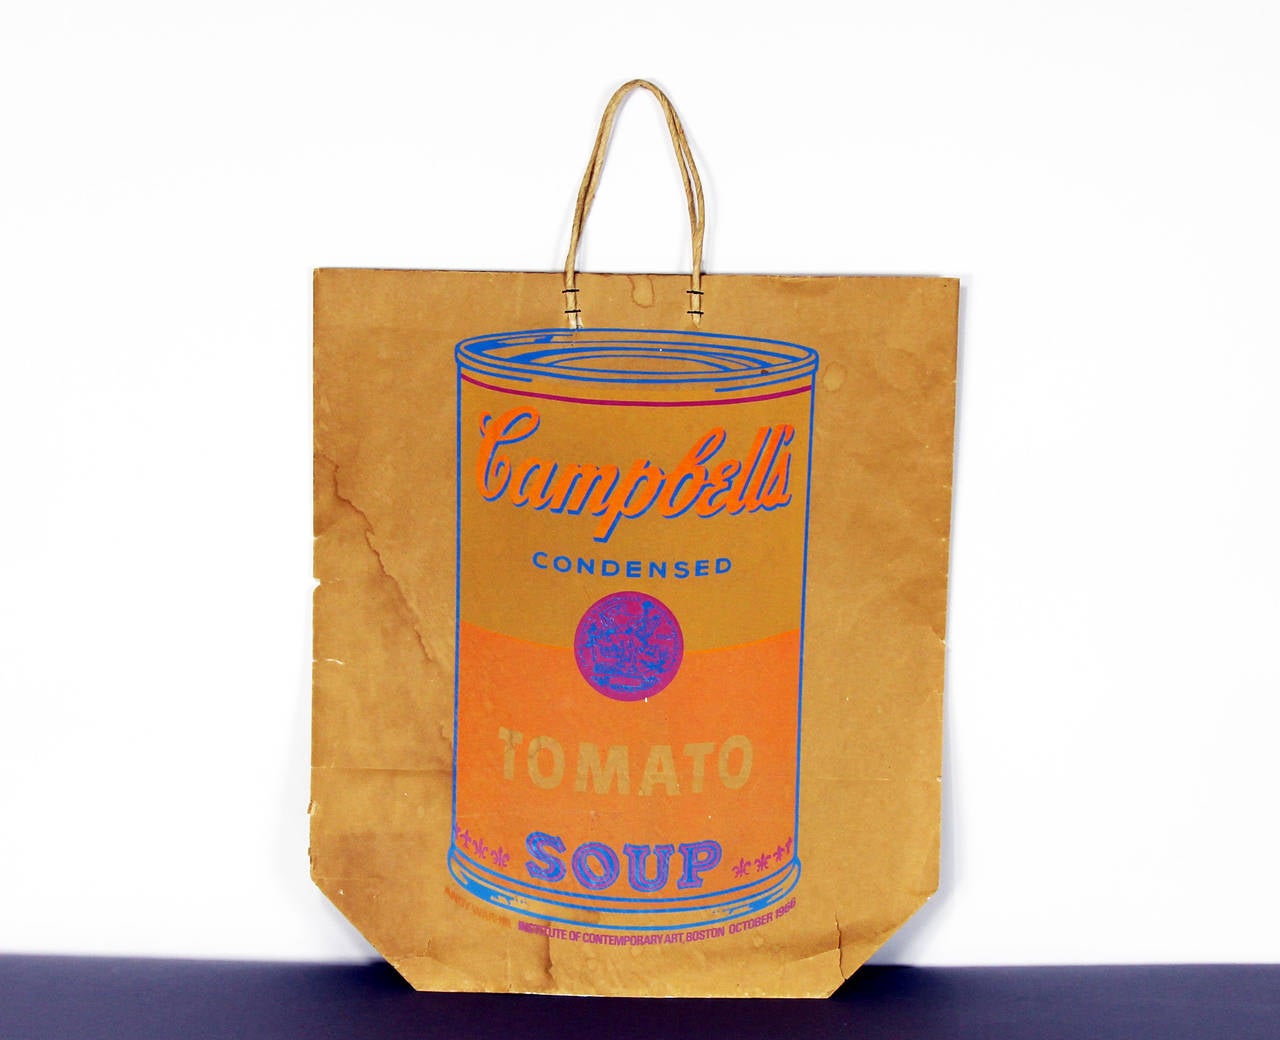 Andy Warhol produced this shopping bag for an exhibition of his work at the Institute of Contemporary Art, Boston in 1966. New York’s Museum of Modern Art has one in their collection.